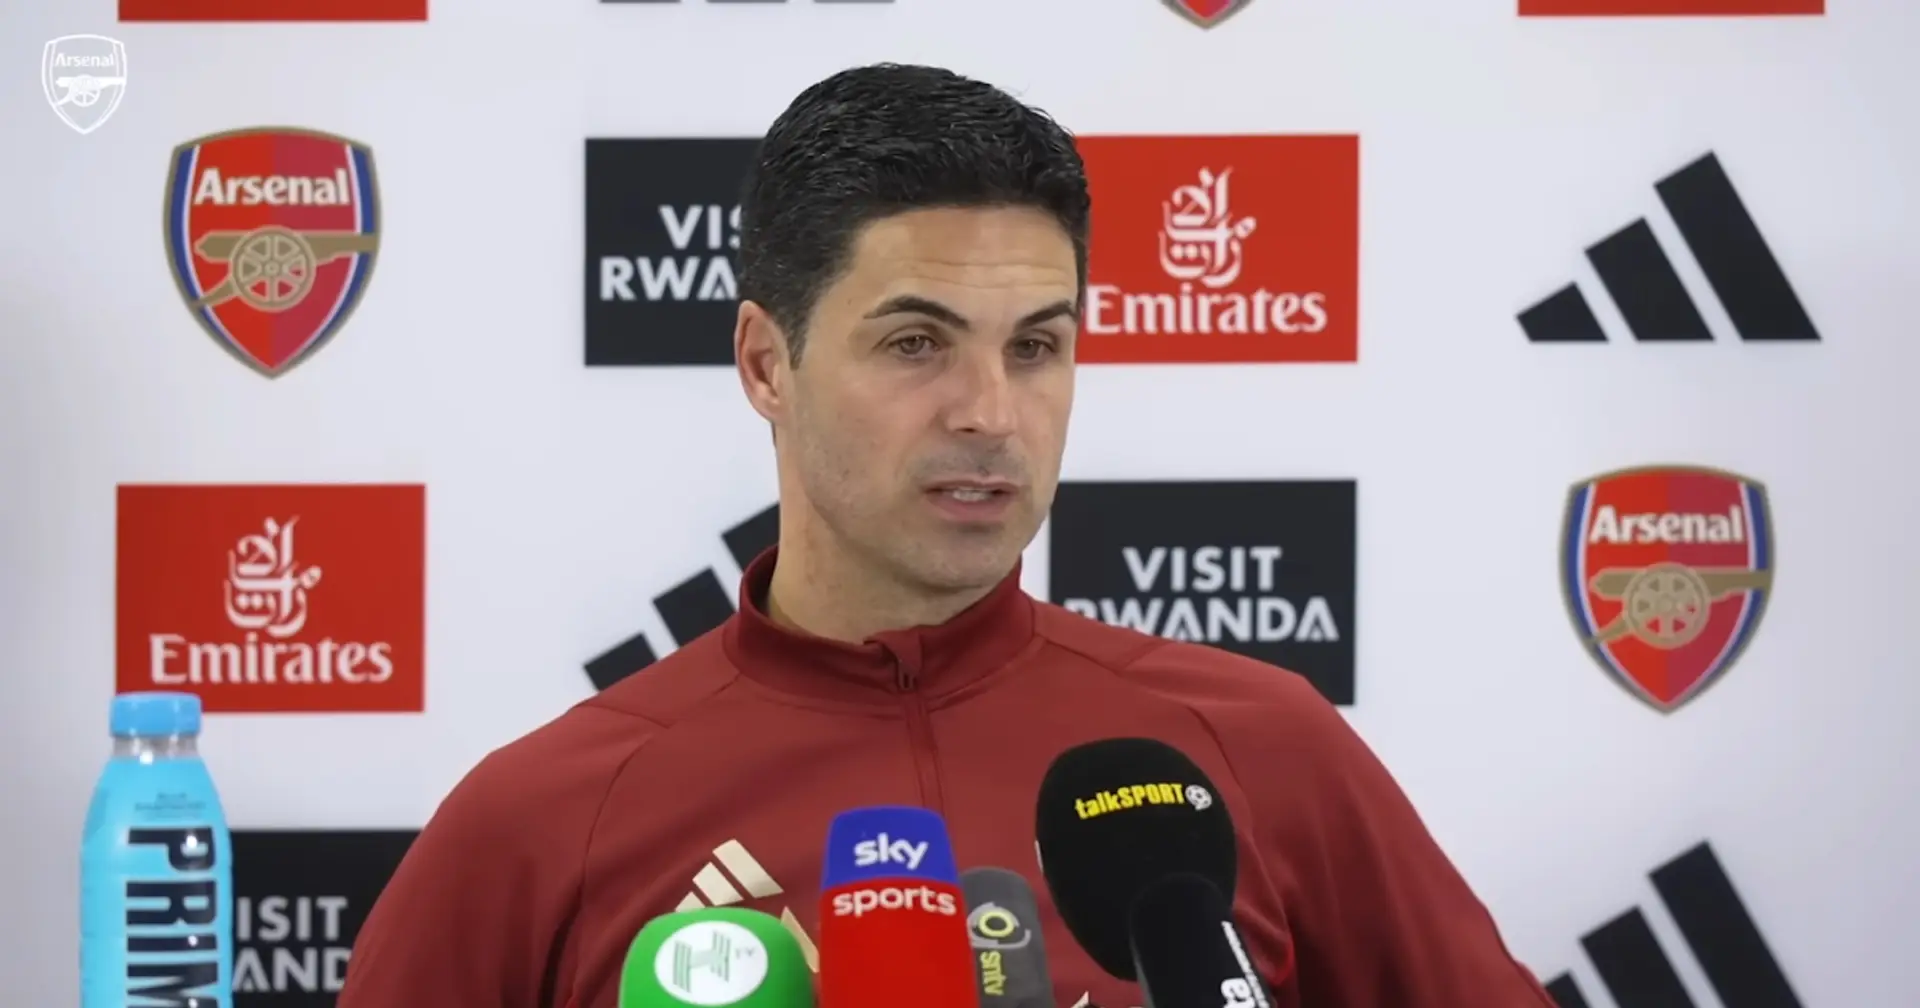 'It's a joy to watch to watch him play football': Arteta reacts to Smith Rowe's first start in months